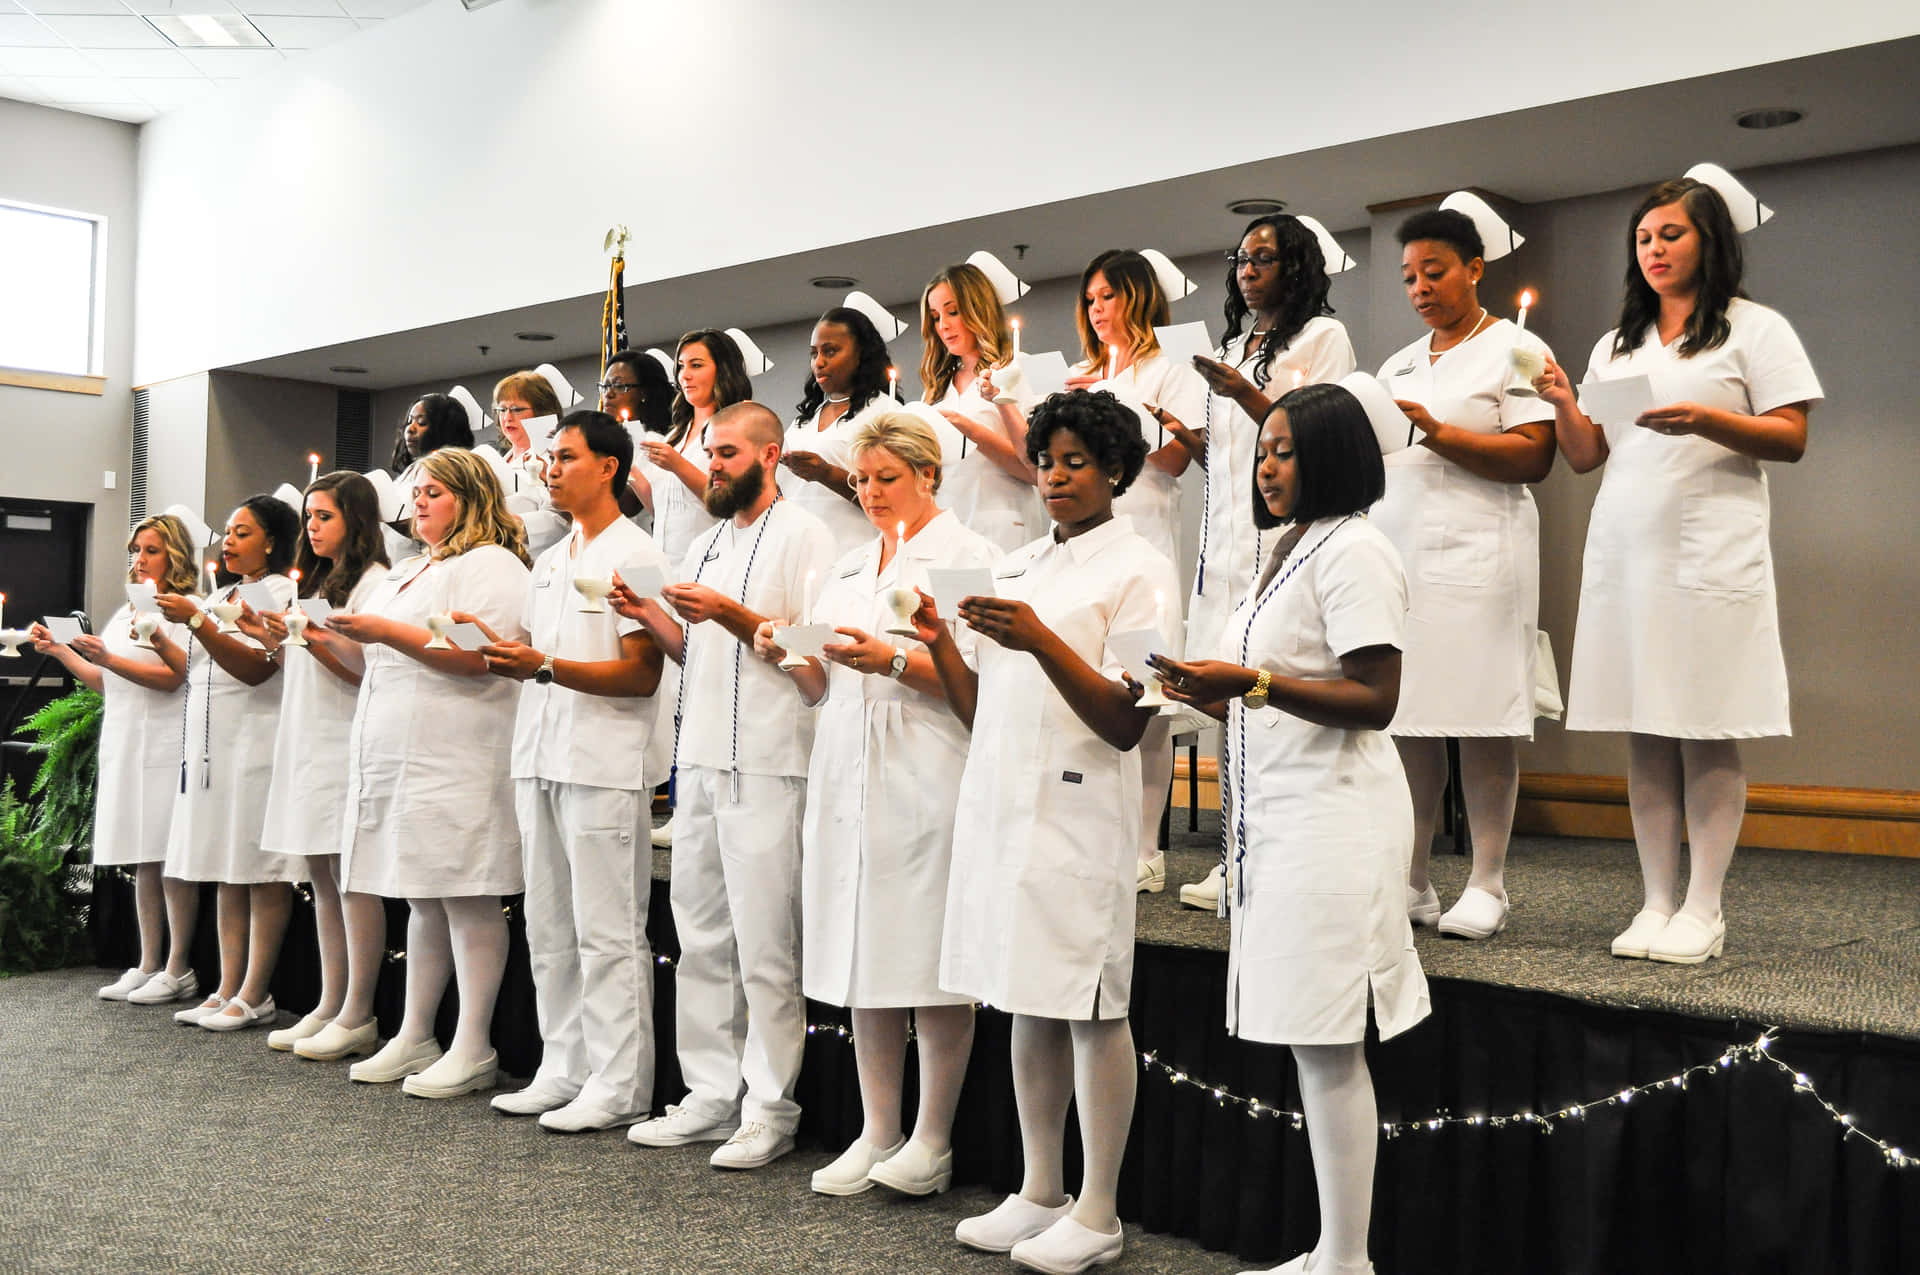 A Group Of Nurses Standing On Stage